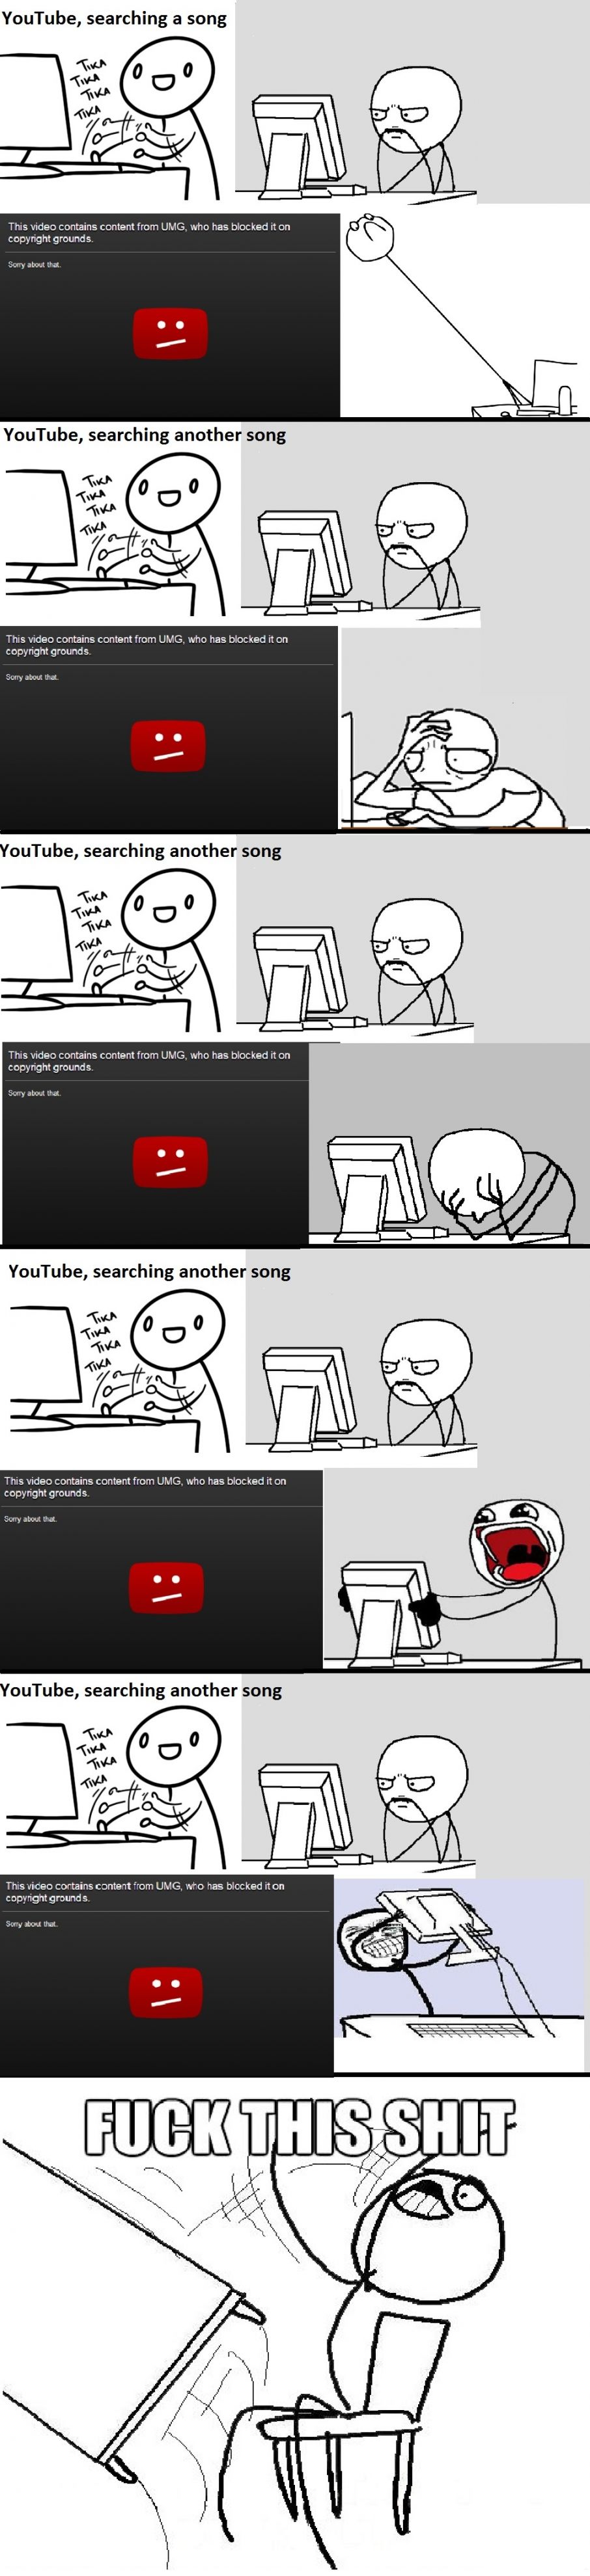 youtube-music-song-search-meme-blank-template-imgflip